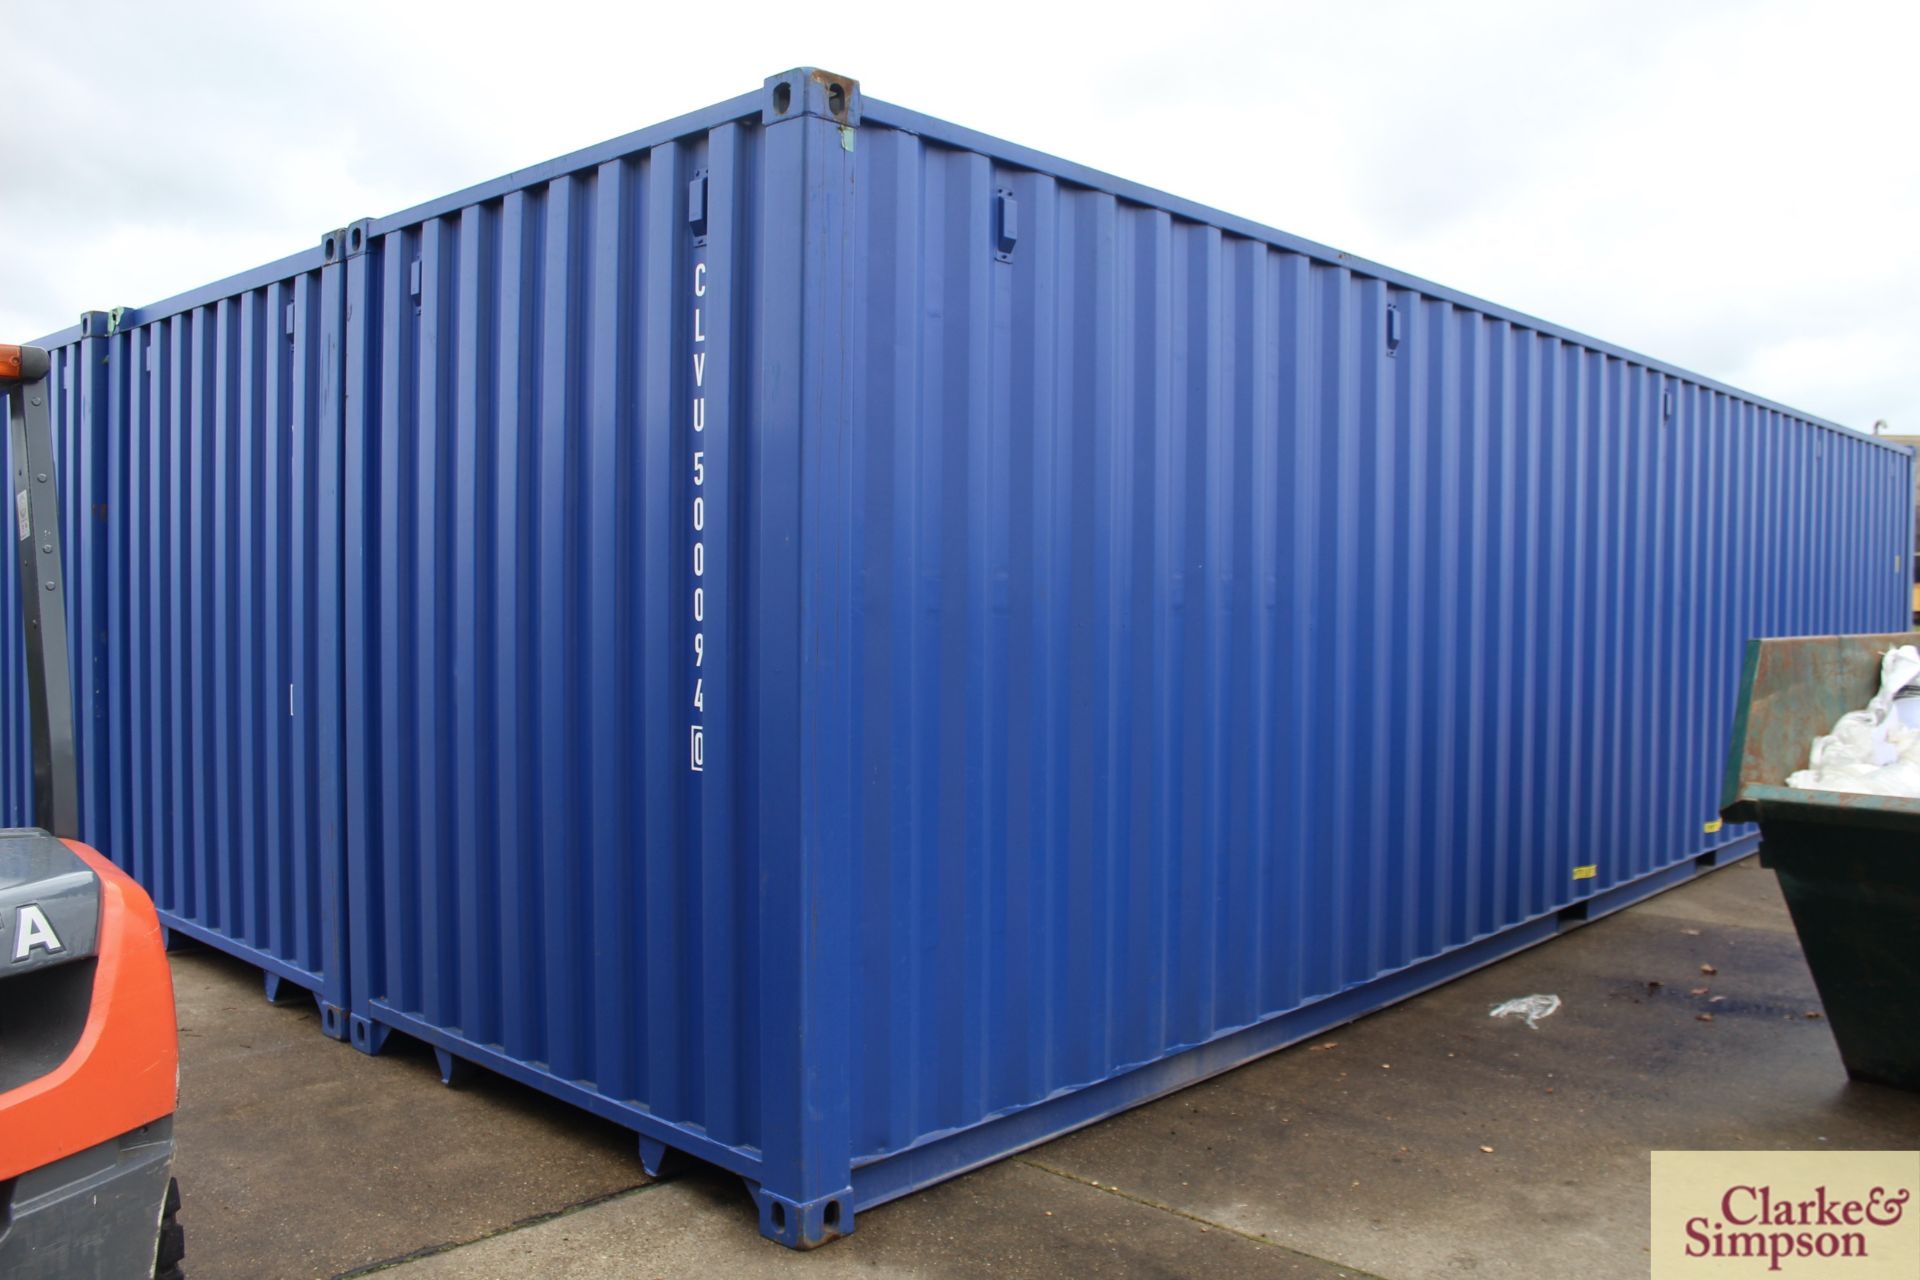 40ft x 9ft6in high shipping container. 2019. Heavily reinforced to interior to include plates - Image 5 of 16